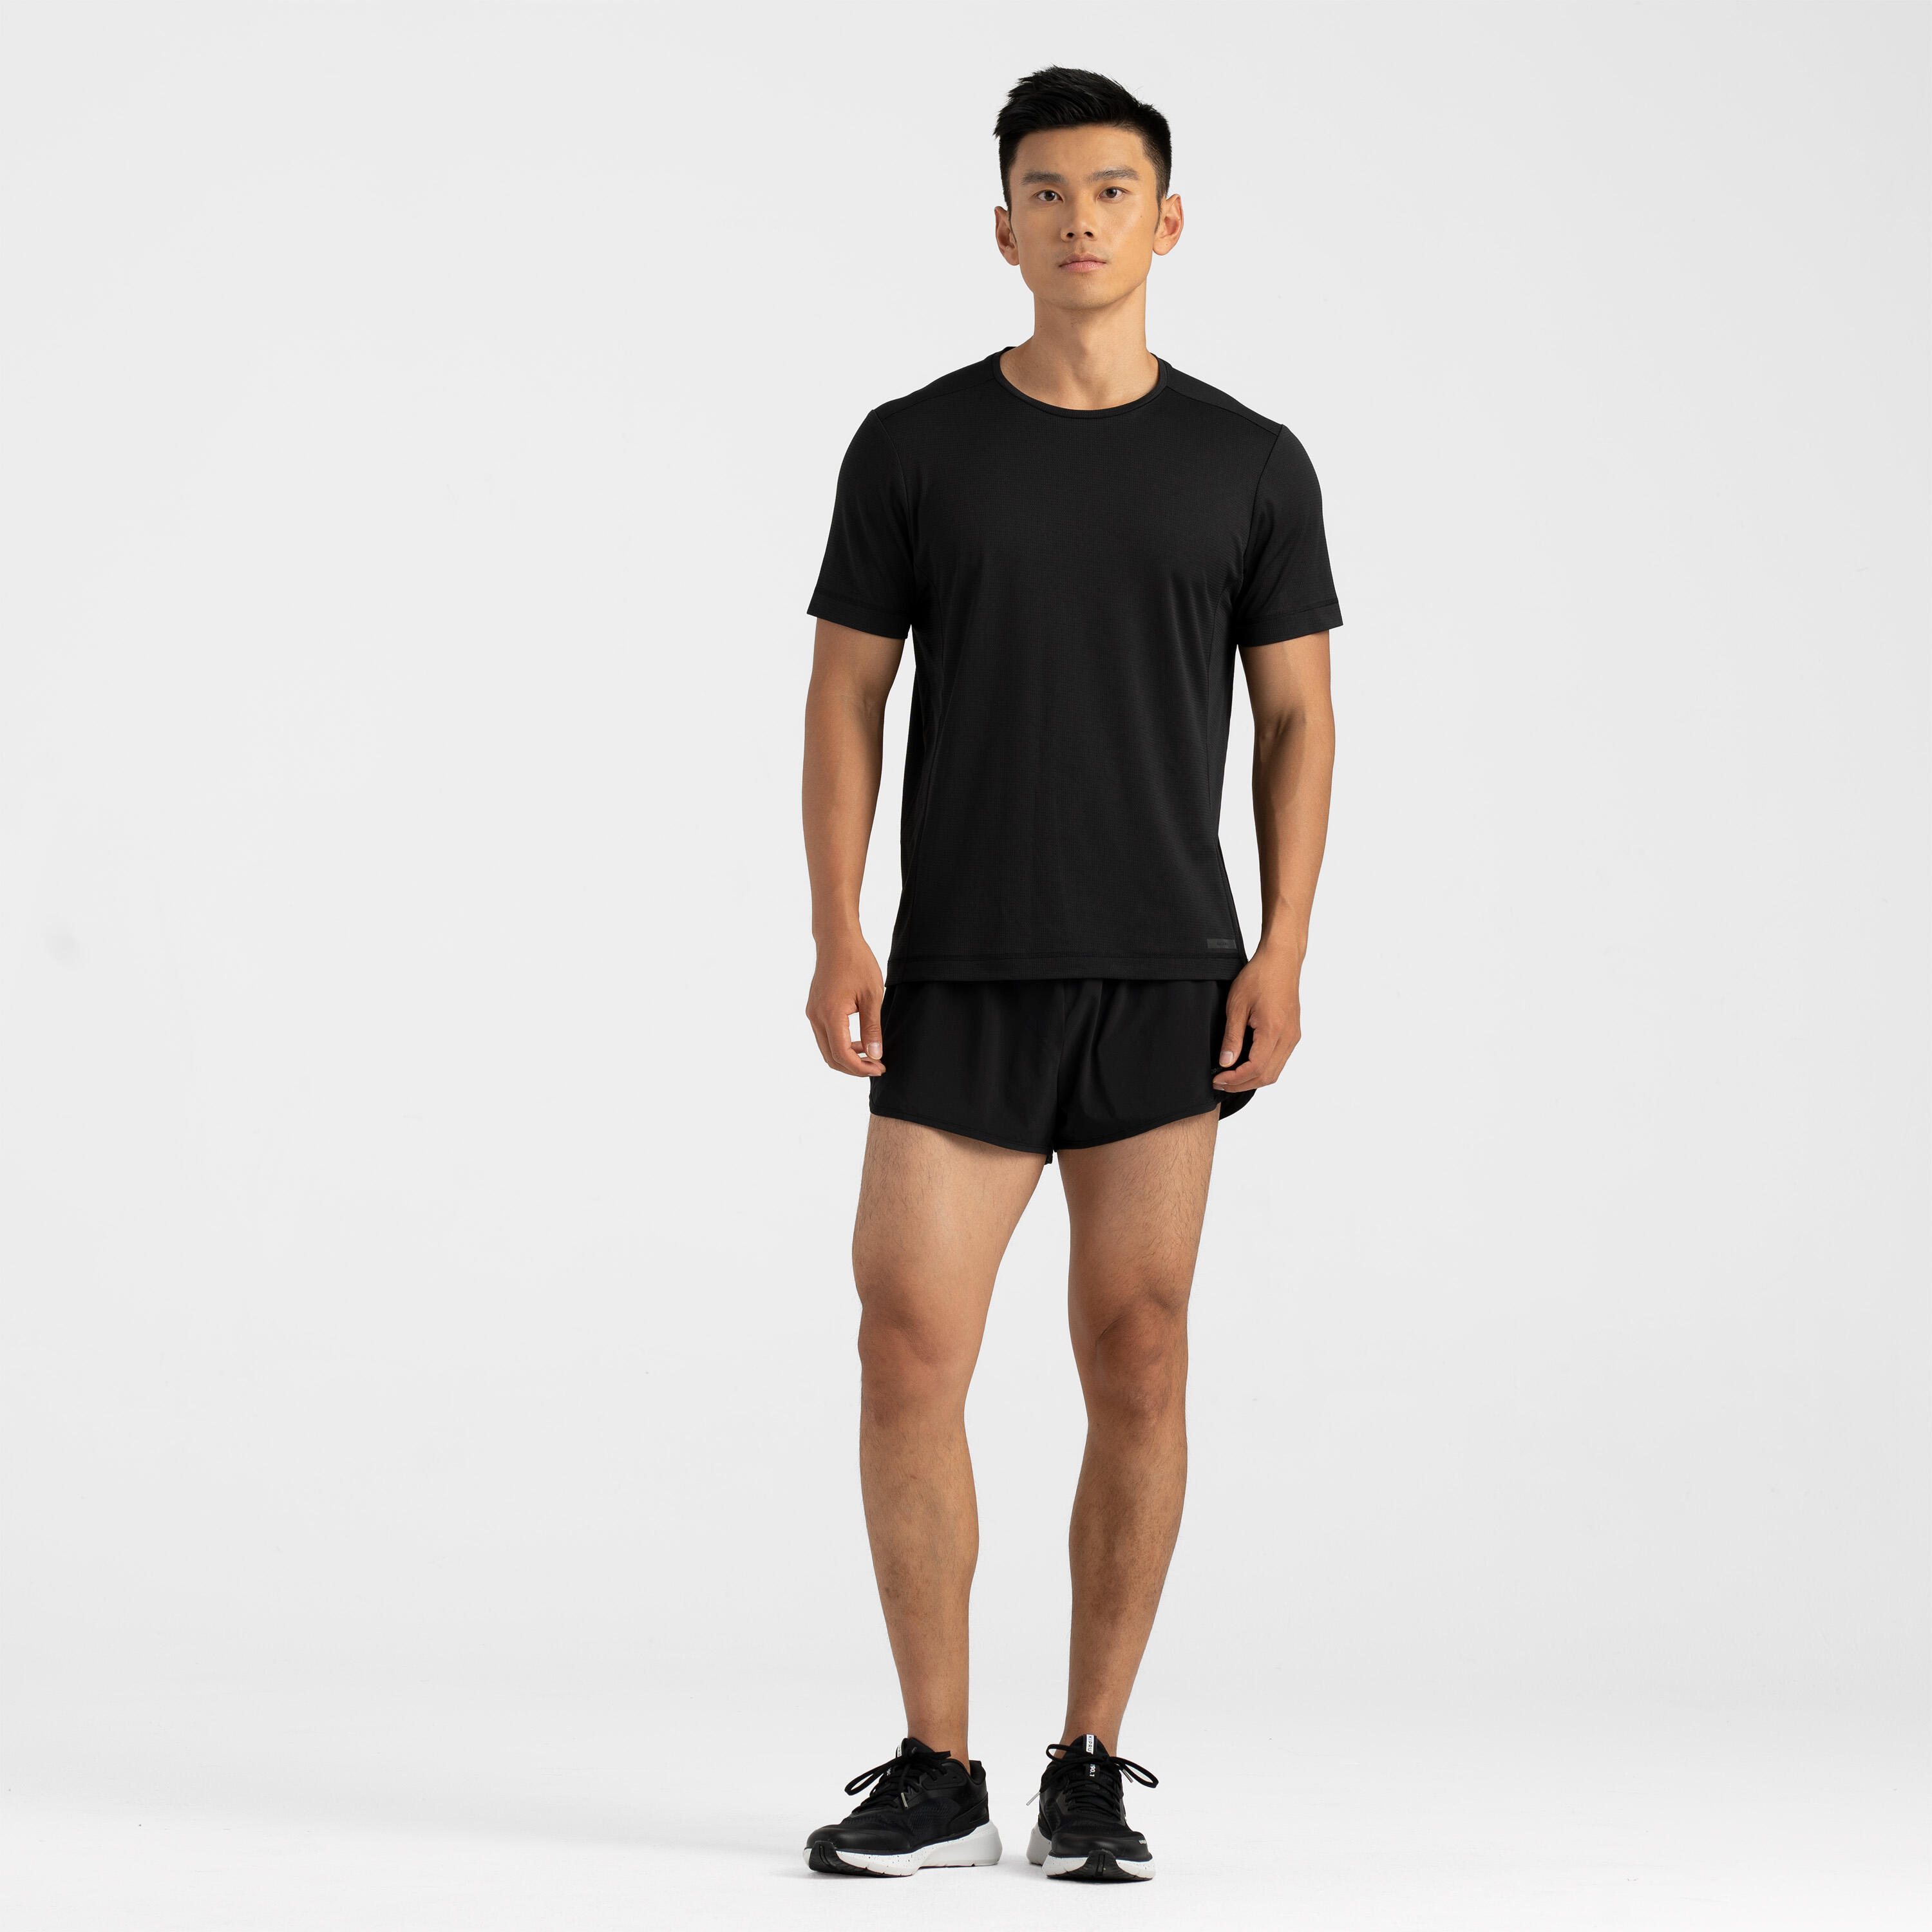 Fashion Quick Dry Men Running T Shirt Long Sleeve Fitness Tops For